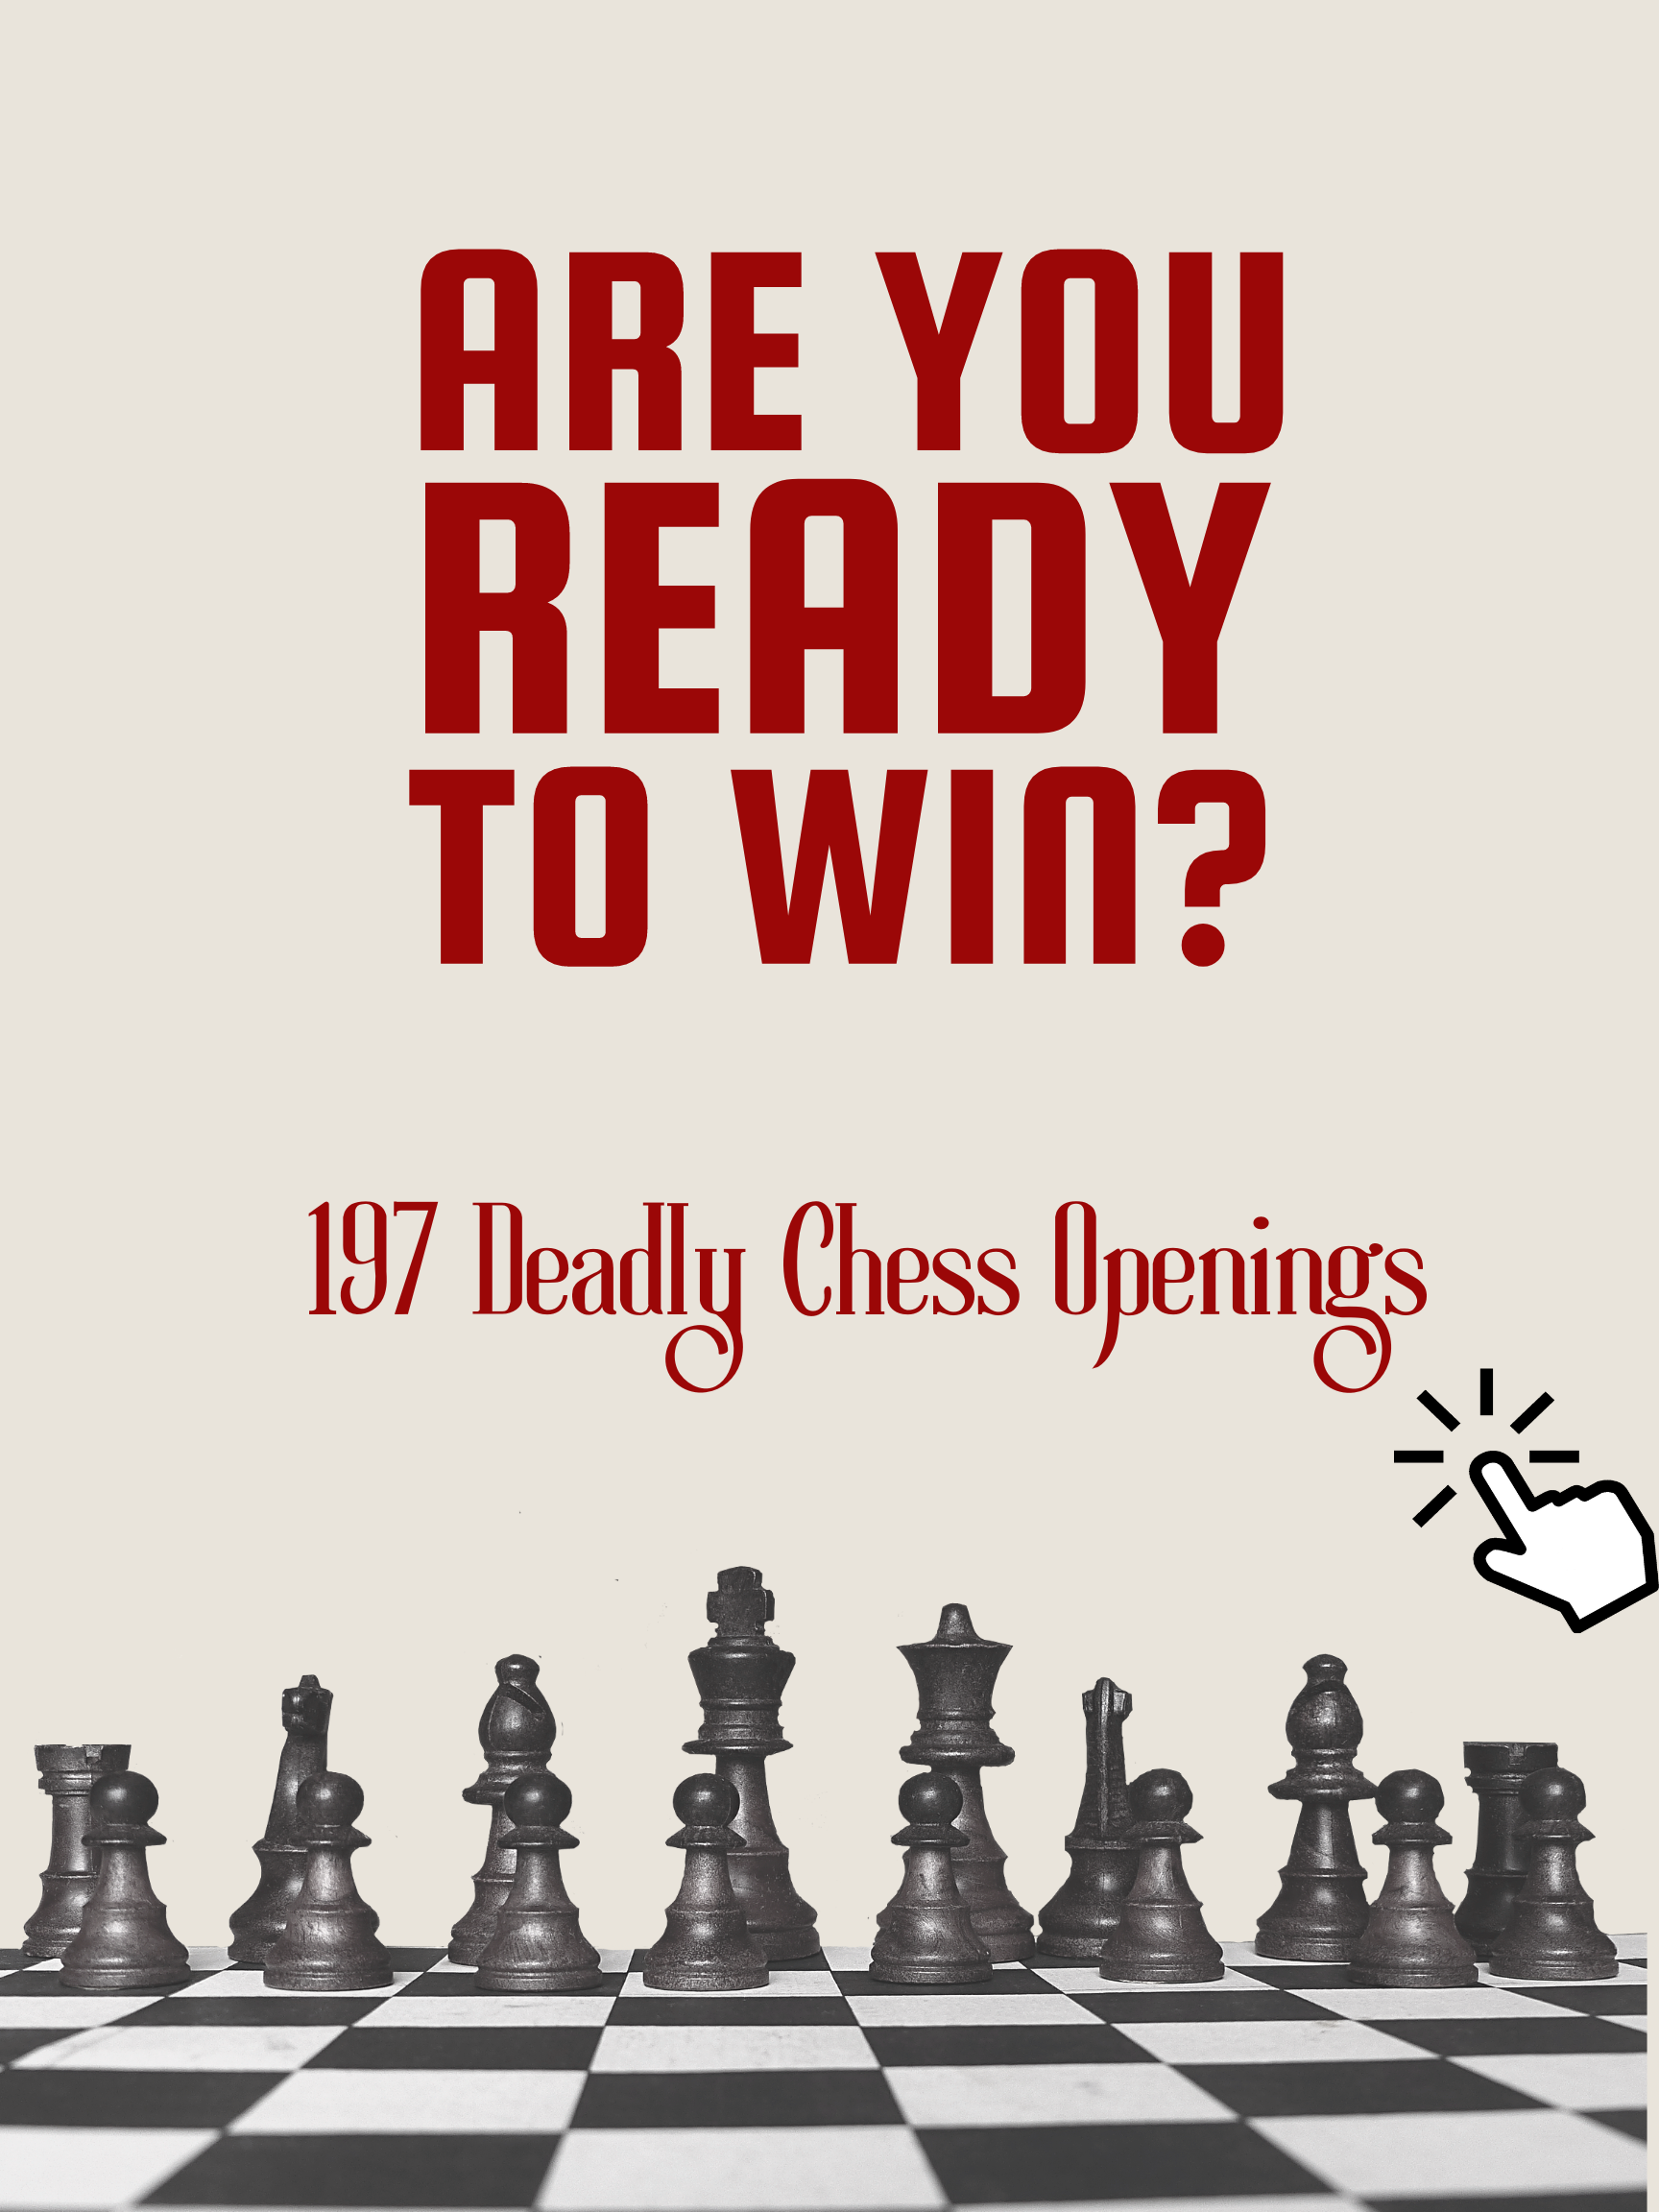 Learn 197 Deadly Openings for White and Black